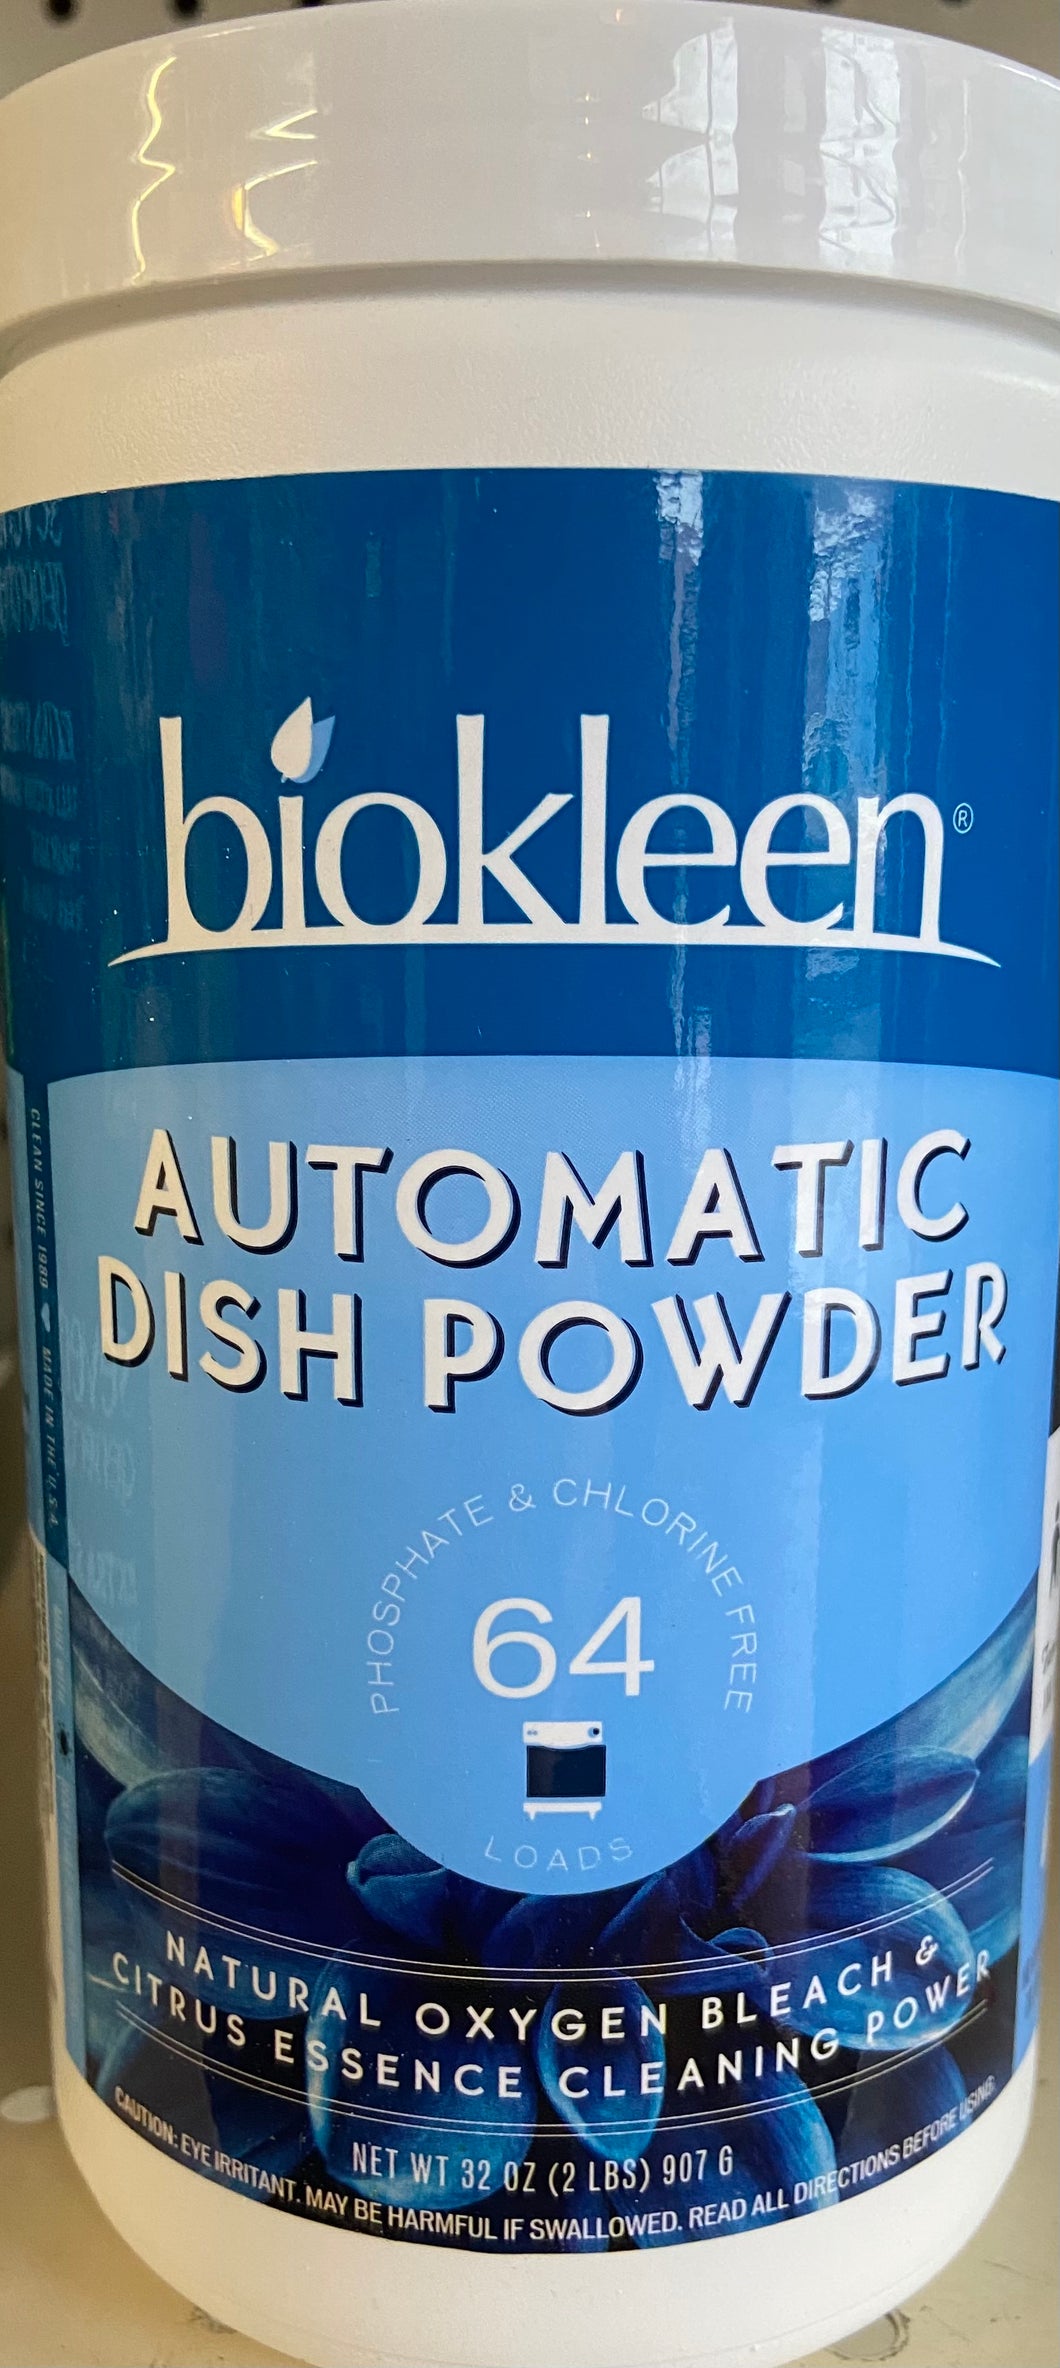 Dish Powder, Natural Oxygen Bleach and Citrus Essence Cleaning Power, Automatic, Biokleen